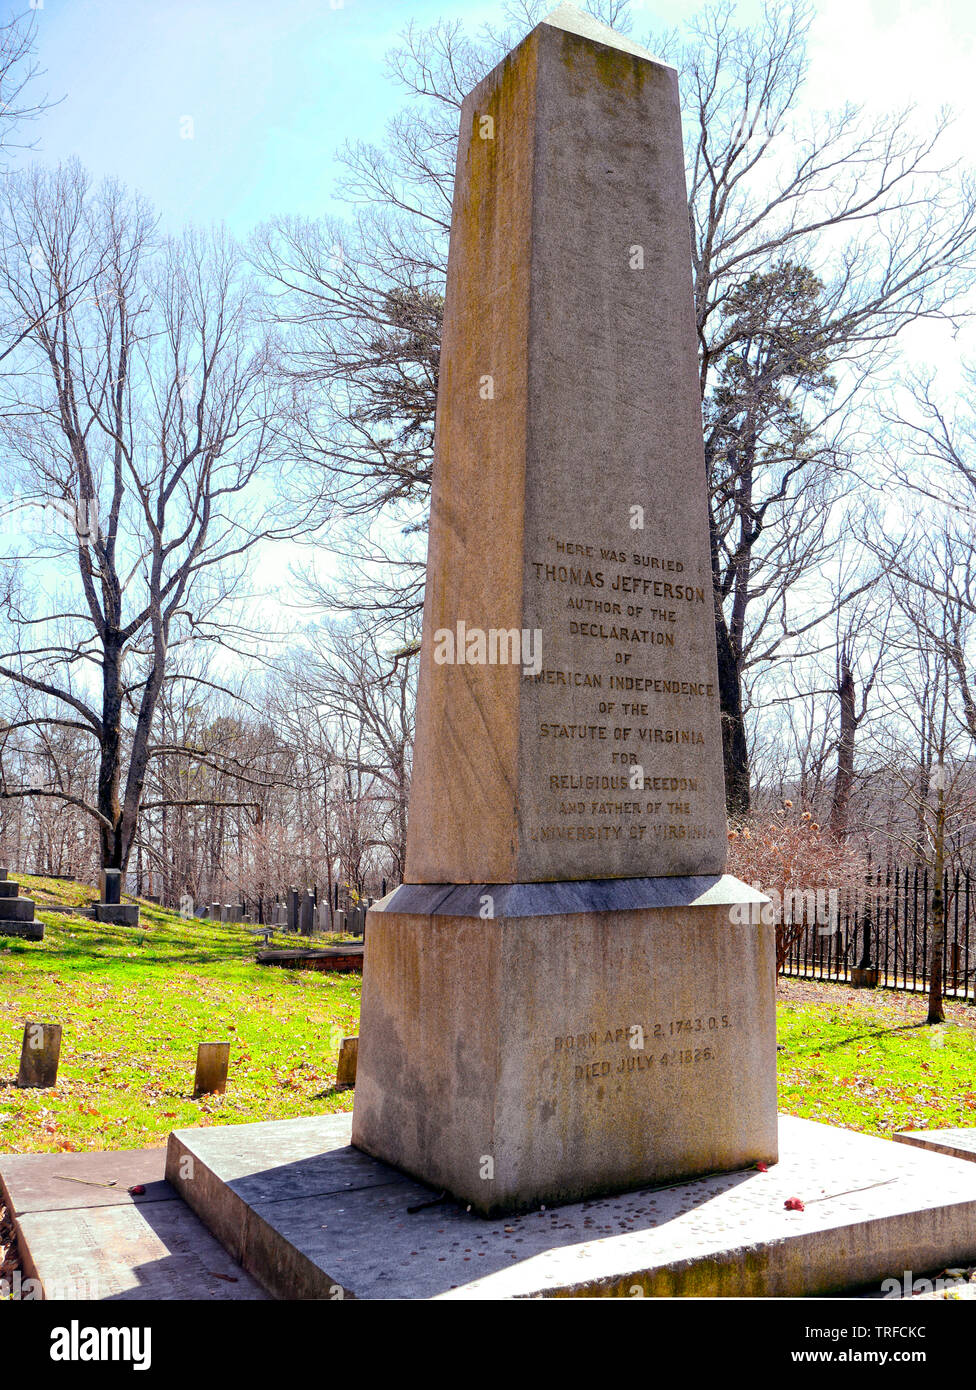 Thomas Jefferson's tomb at Monticello Virginia. The tomb was designed by Jefferson and he chose the epitaph.inscription. Stock Photo